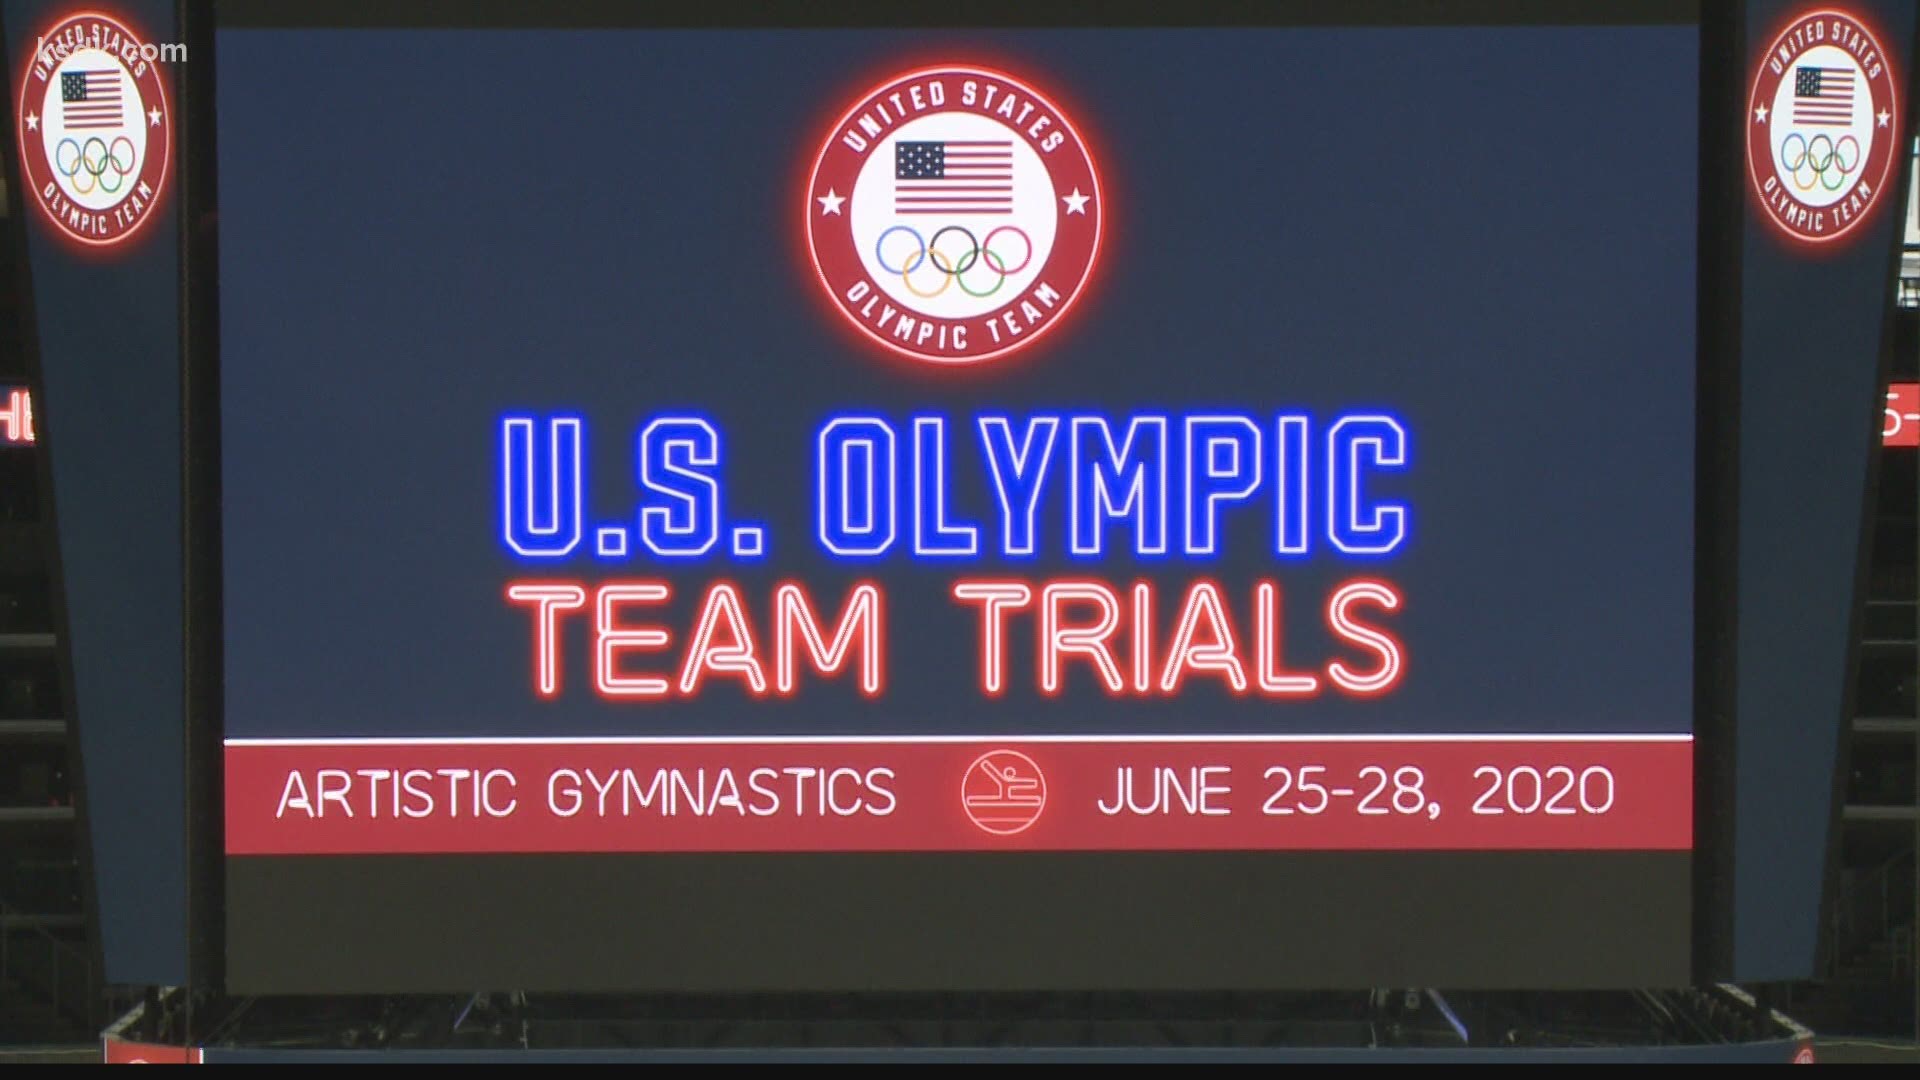 The trials have been rescheduled for June 24-27, 2021